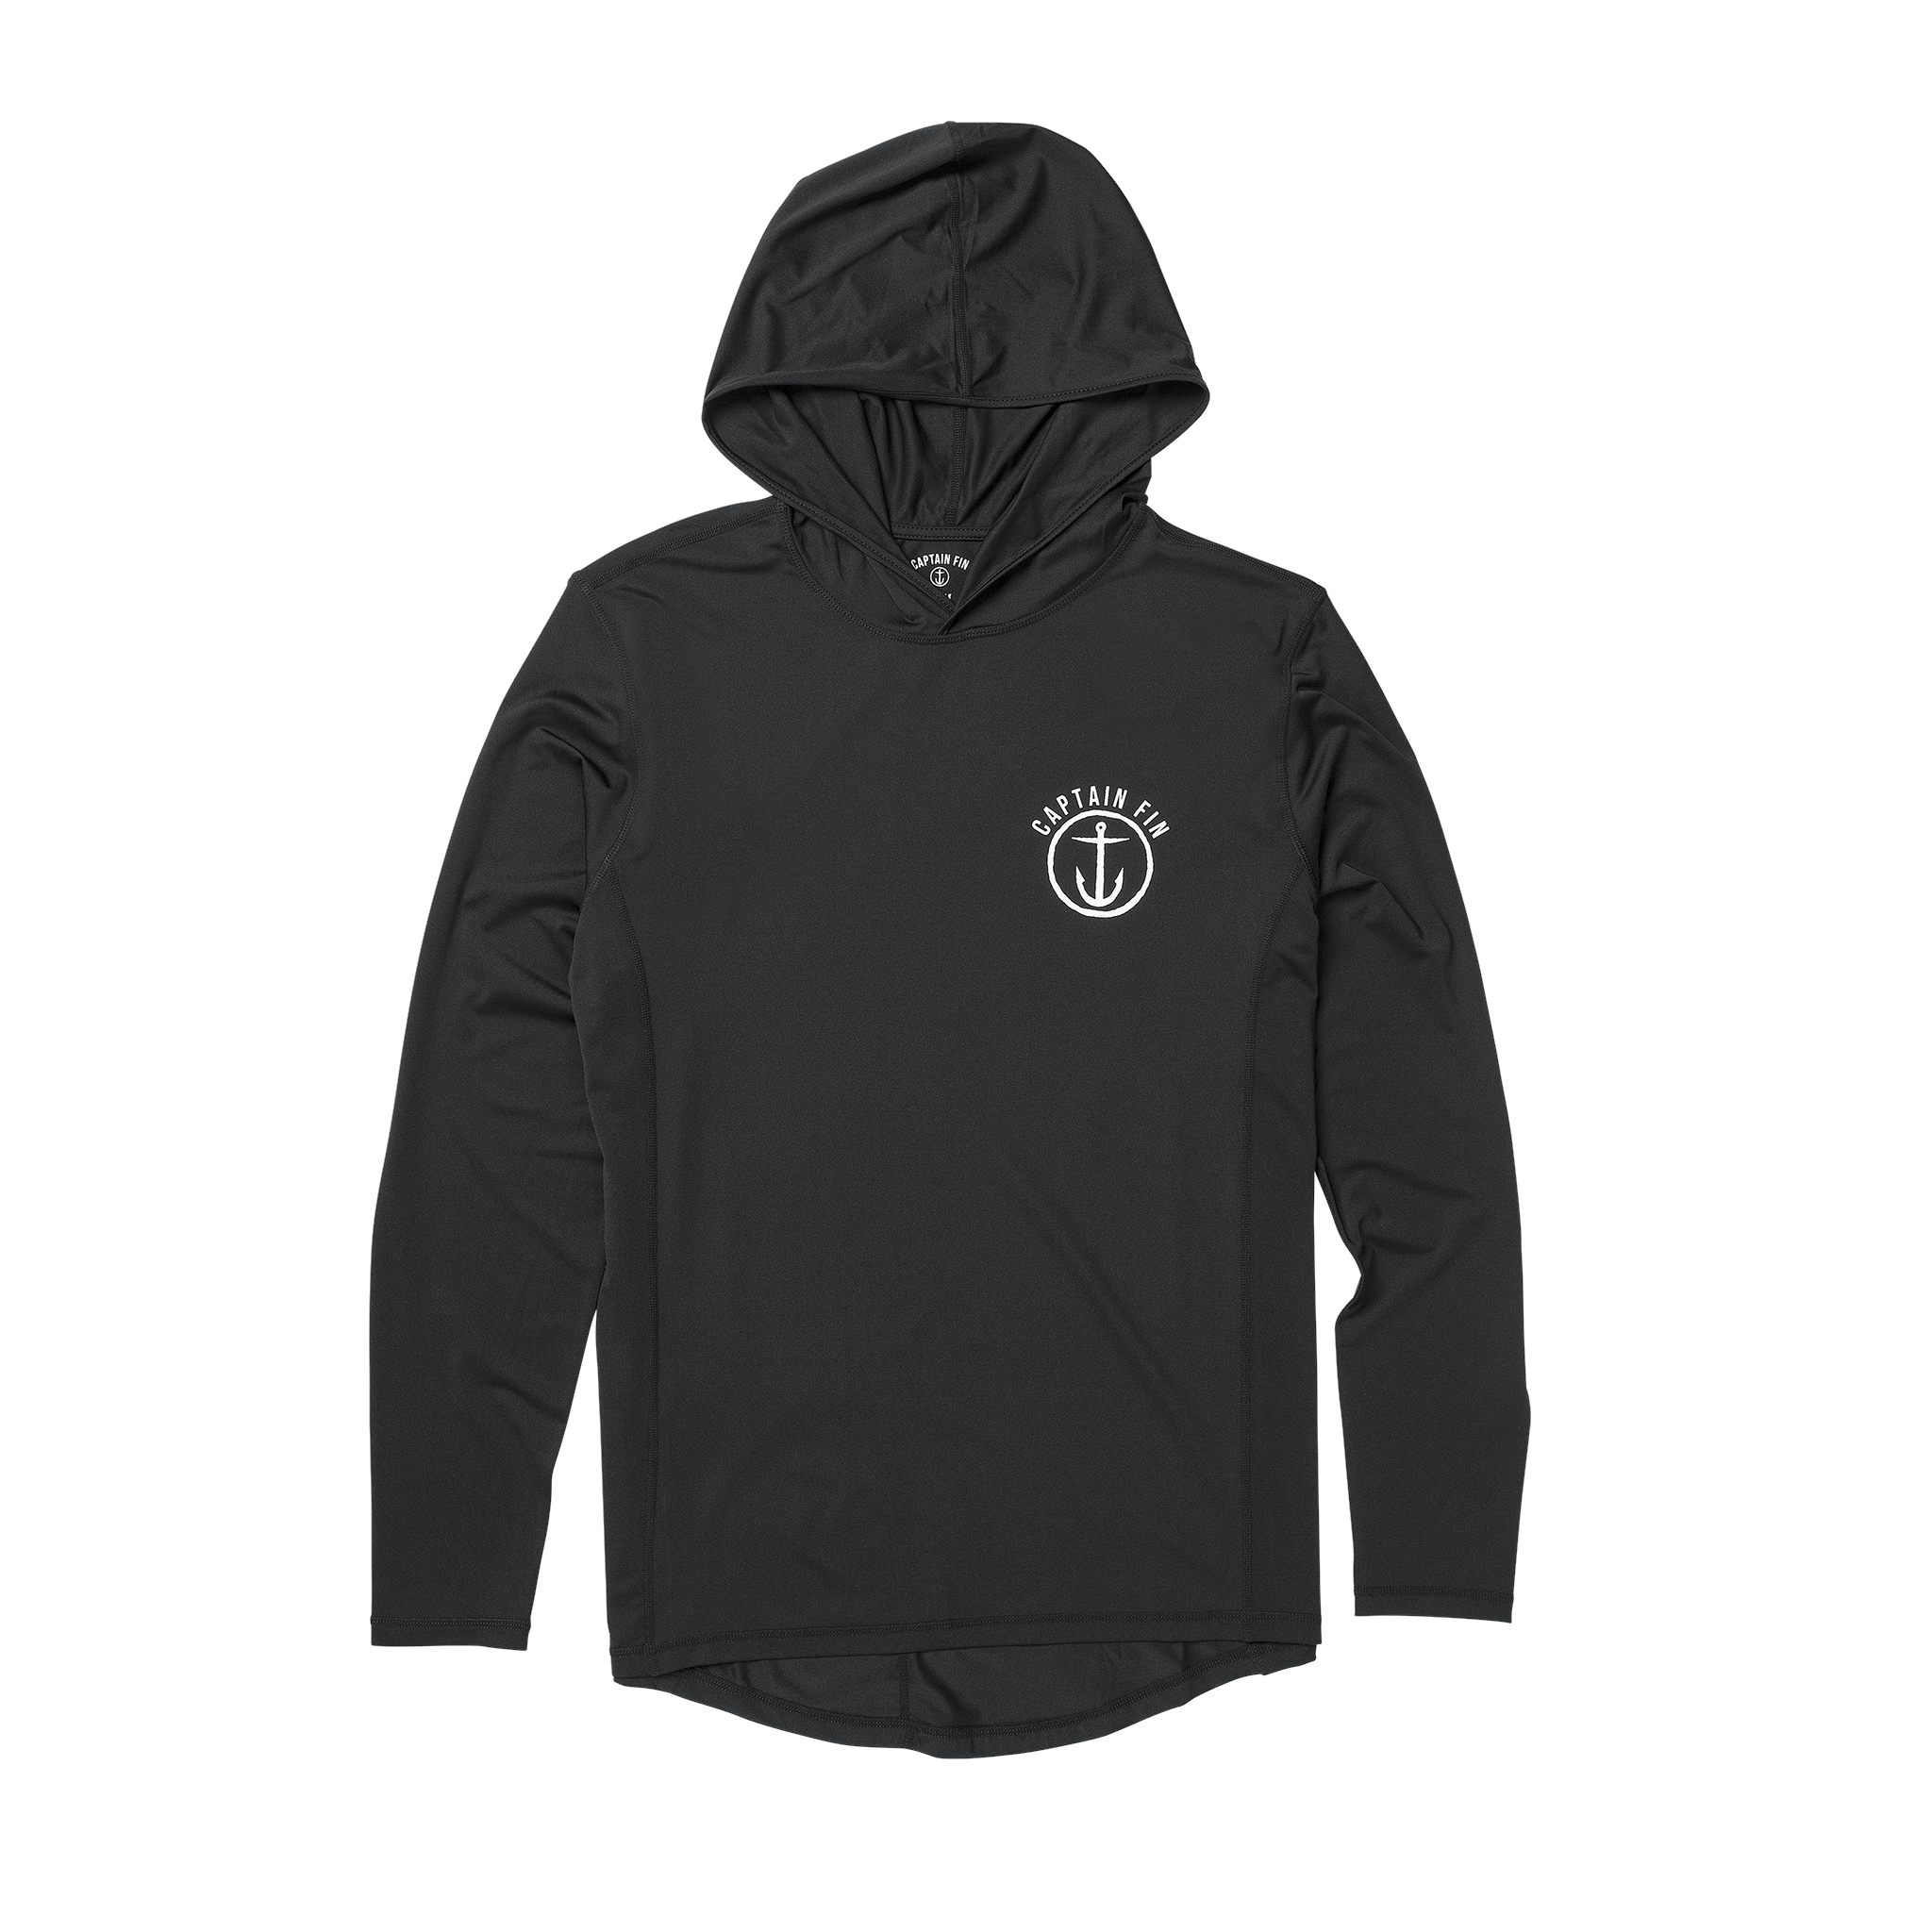 Early Boater Long Sleeve Hooded Surf Shirt - Black